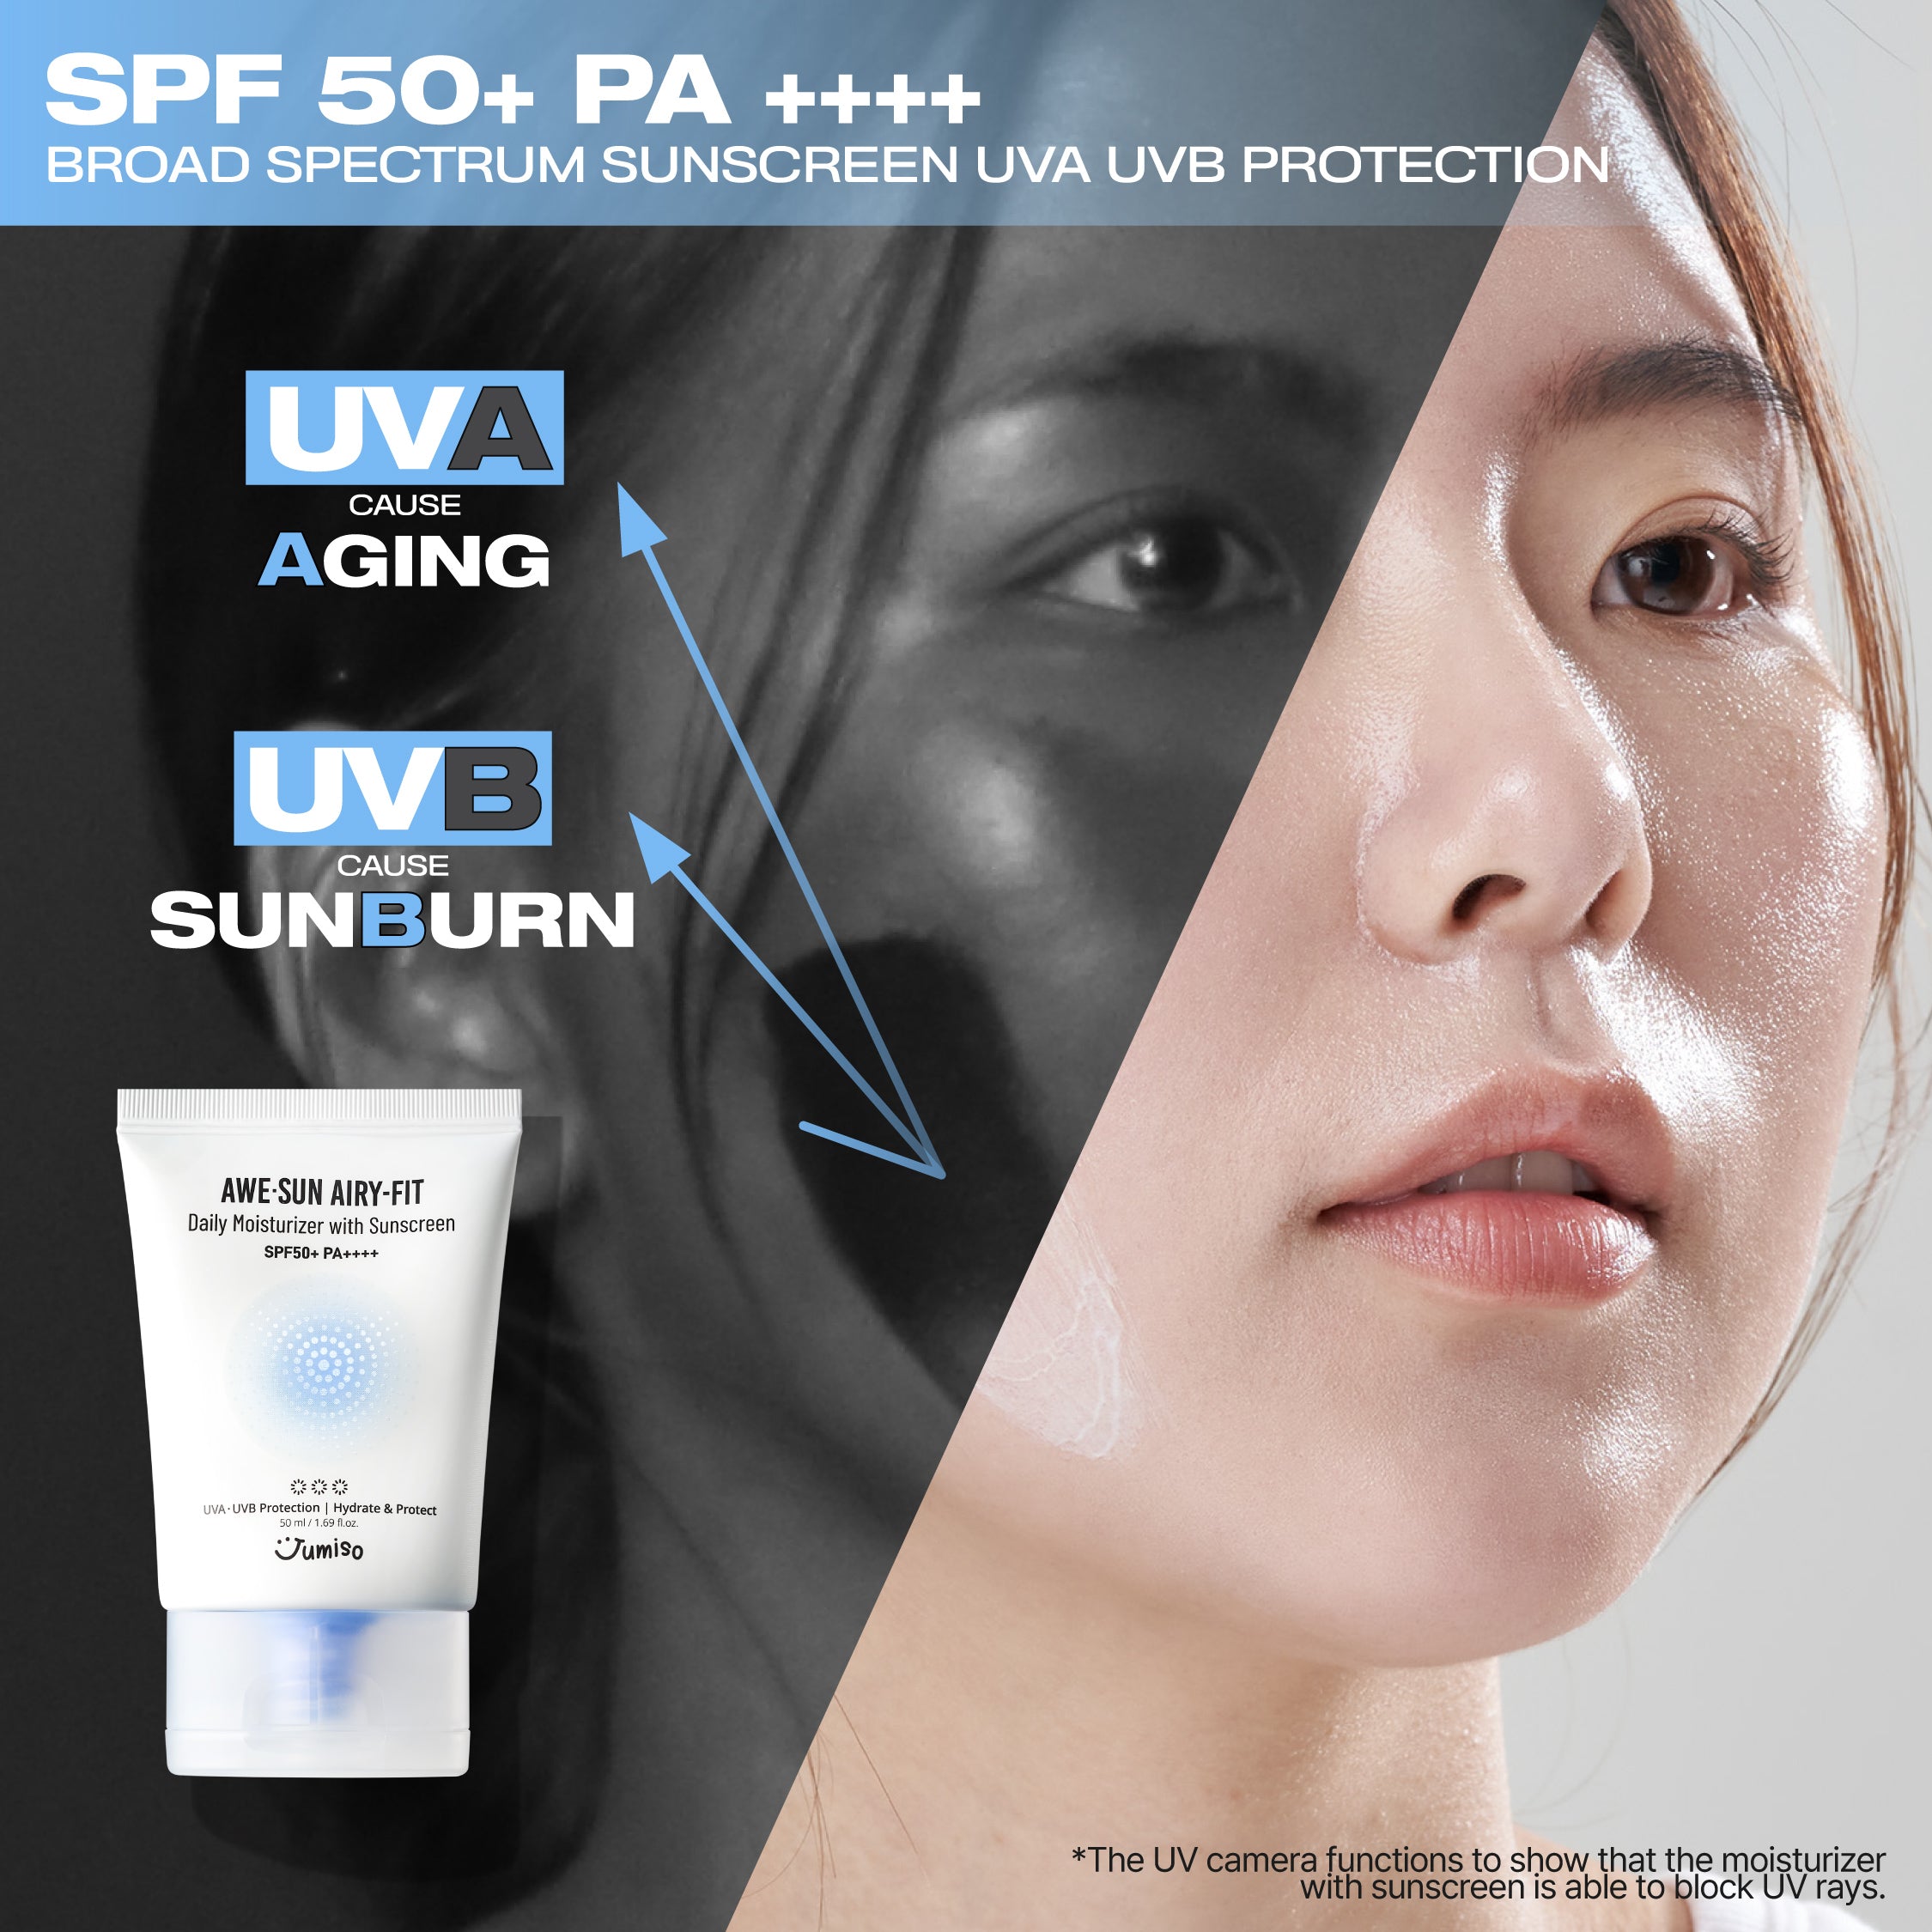 AWE⋅SUN AIRY-FIT Daily Moisturizer with Sunscreen SPF50+ PA++++